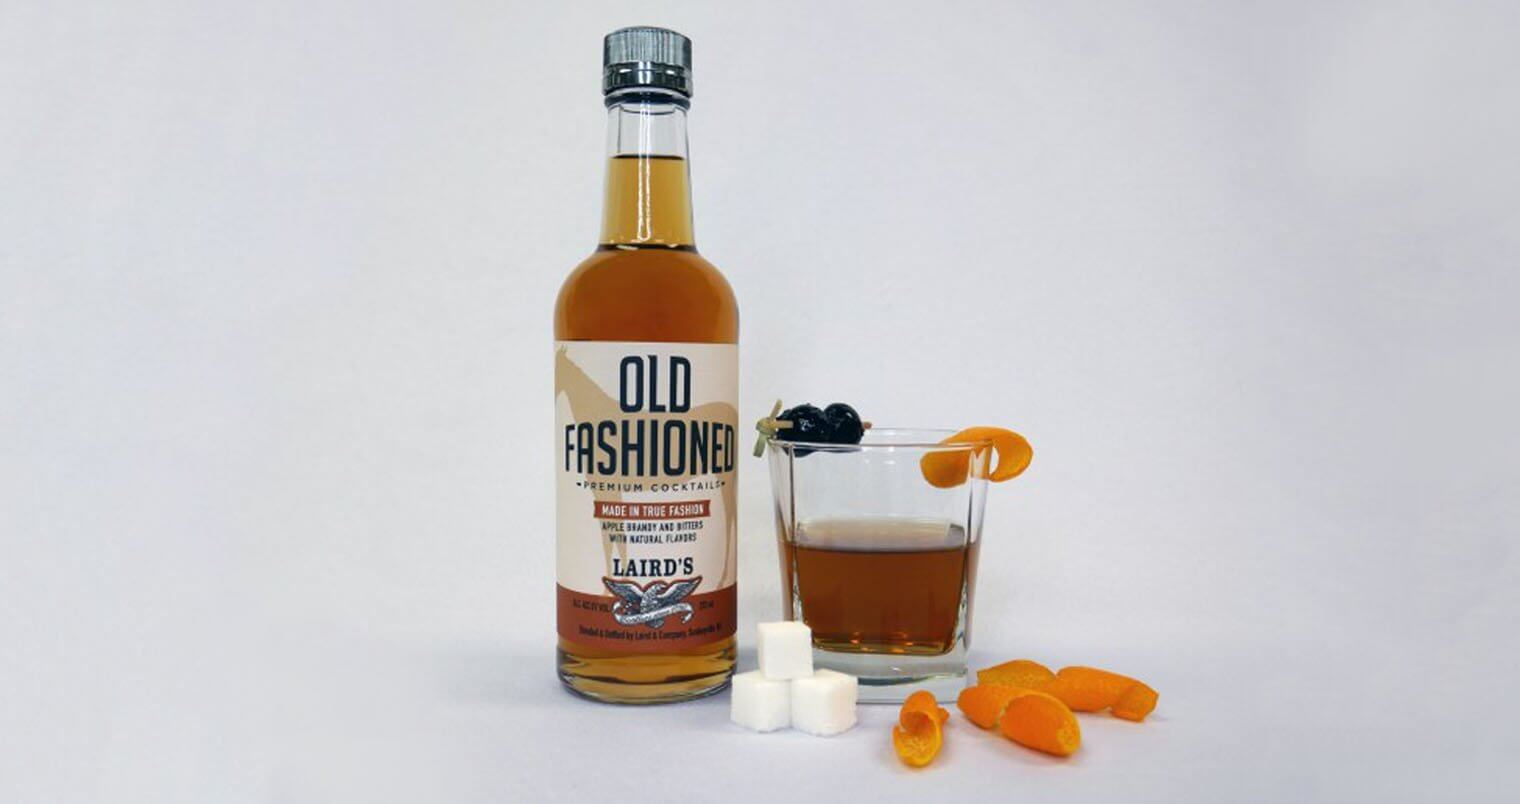 Laird's Old Fashioned, featured image